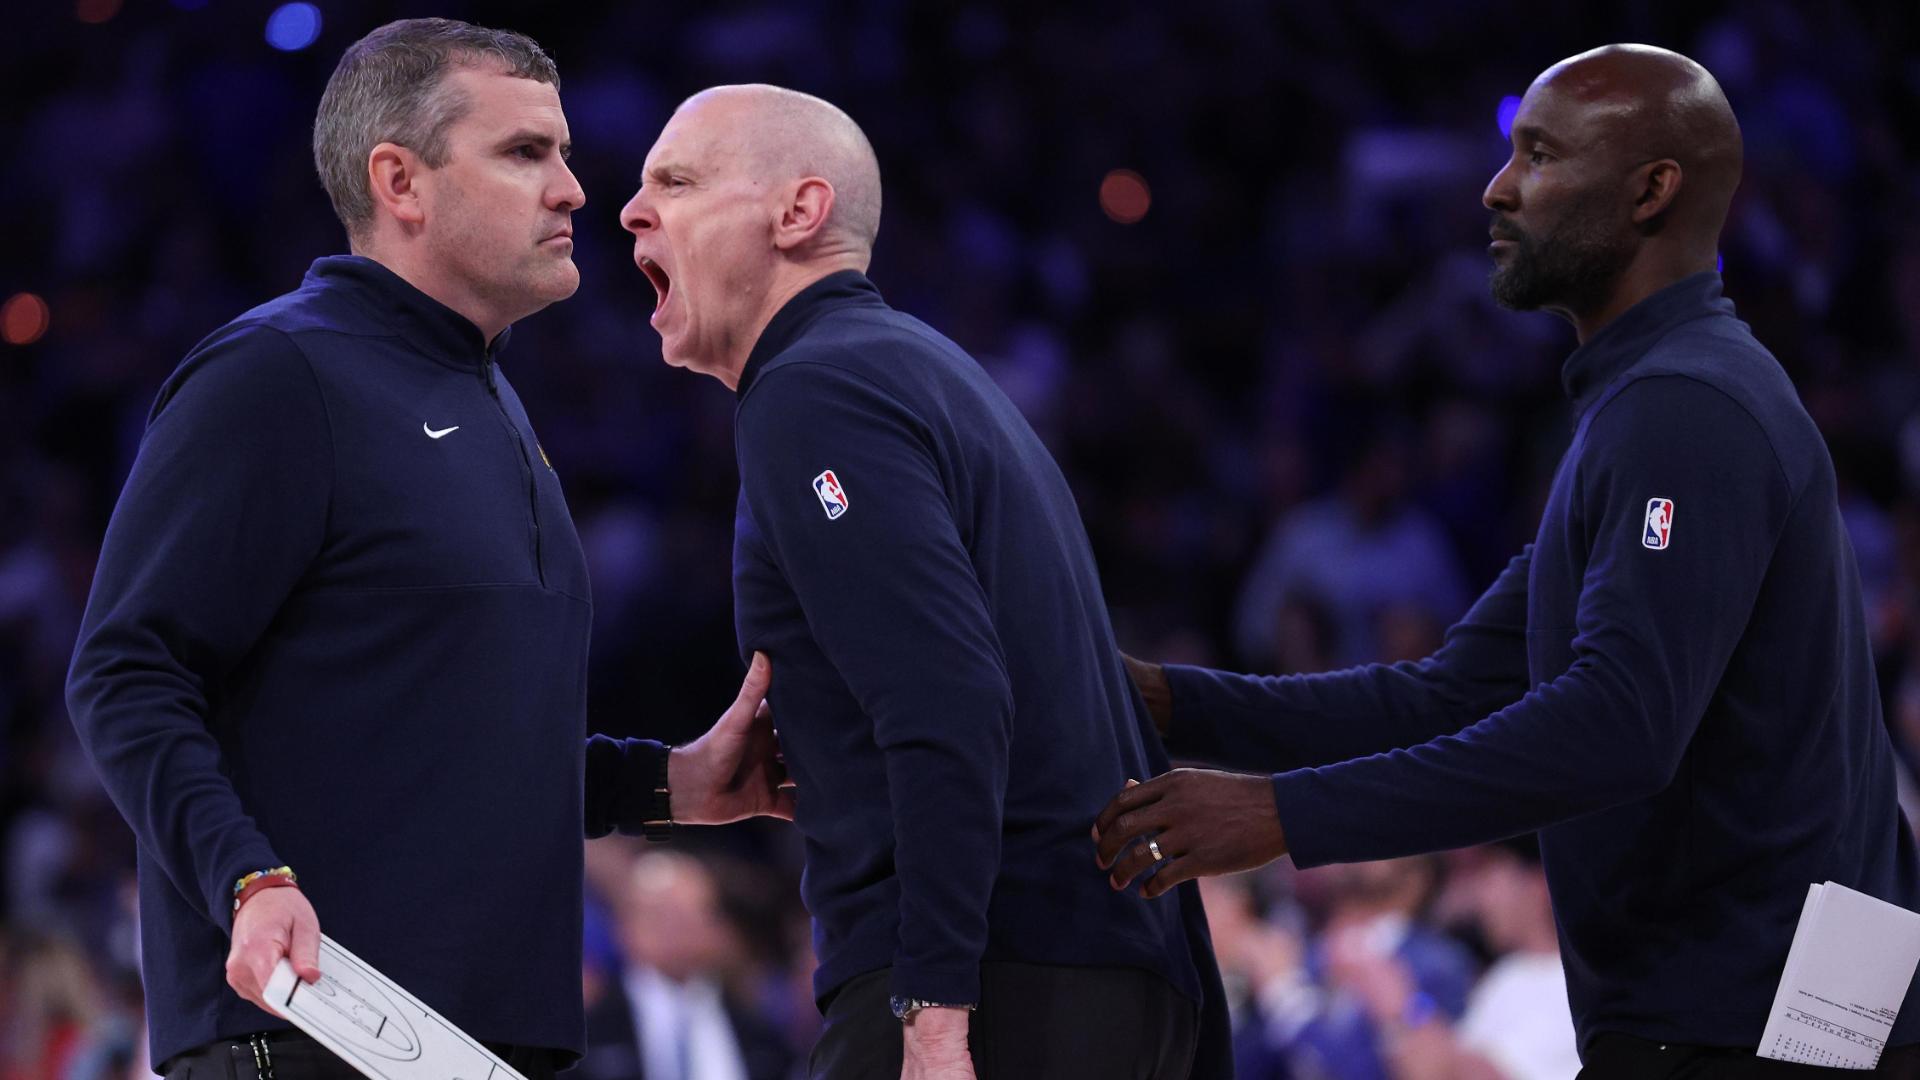 Rick Carlisle is ejected in the fourth quarter for clapping in the face of NBA official Marc Davis.